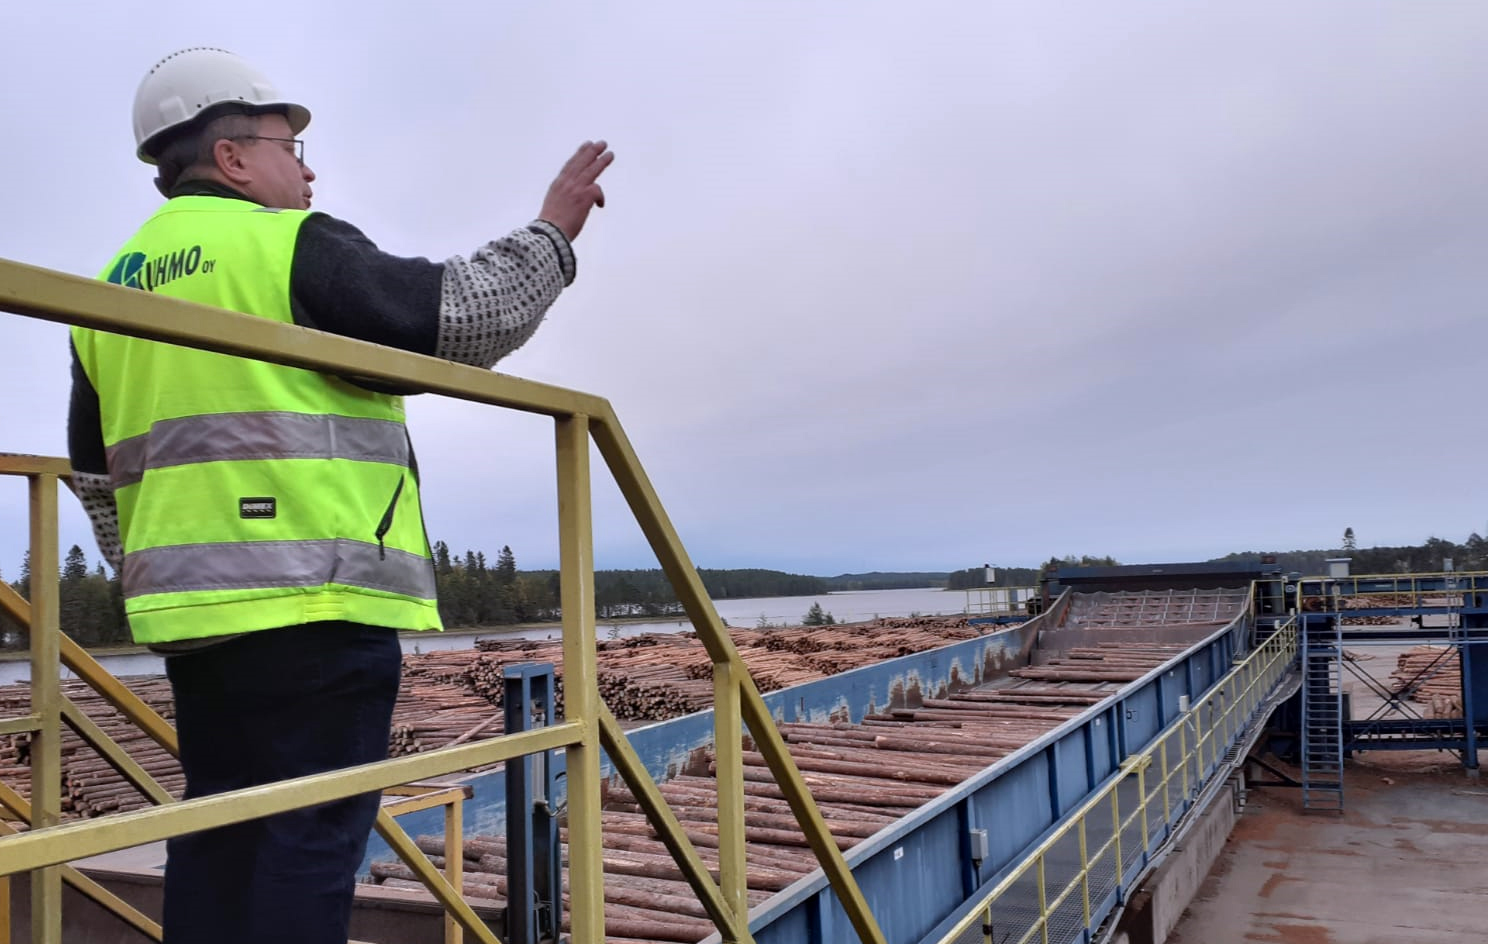 The Kuhmo sawmill purchases 900,000 cubic metres of raw wood per year. Photo: Hannes Mäntyranta